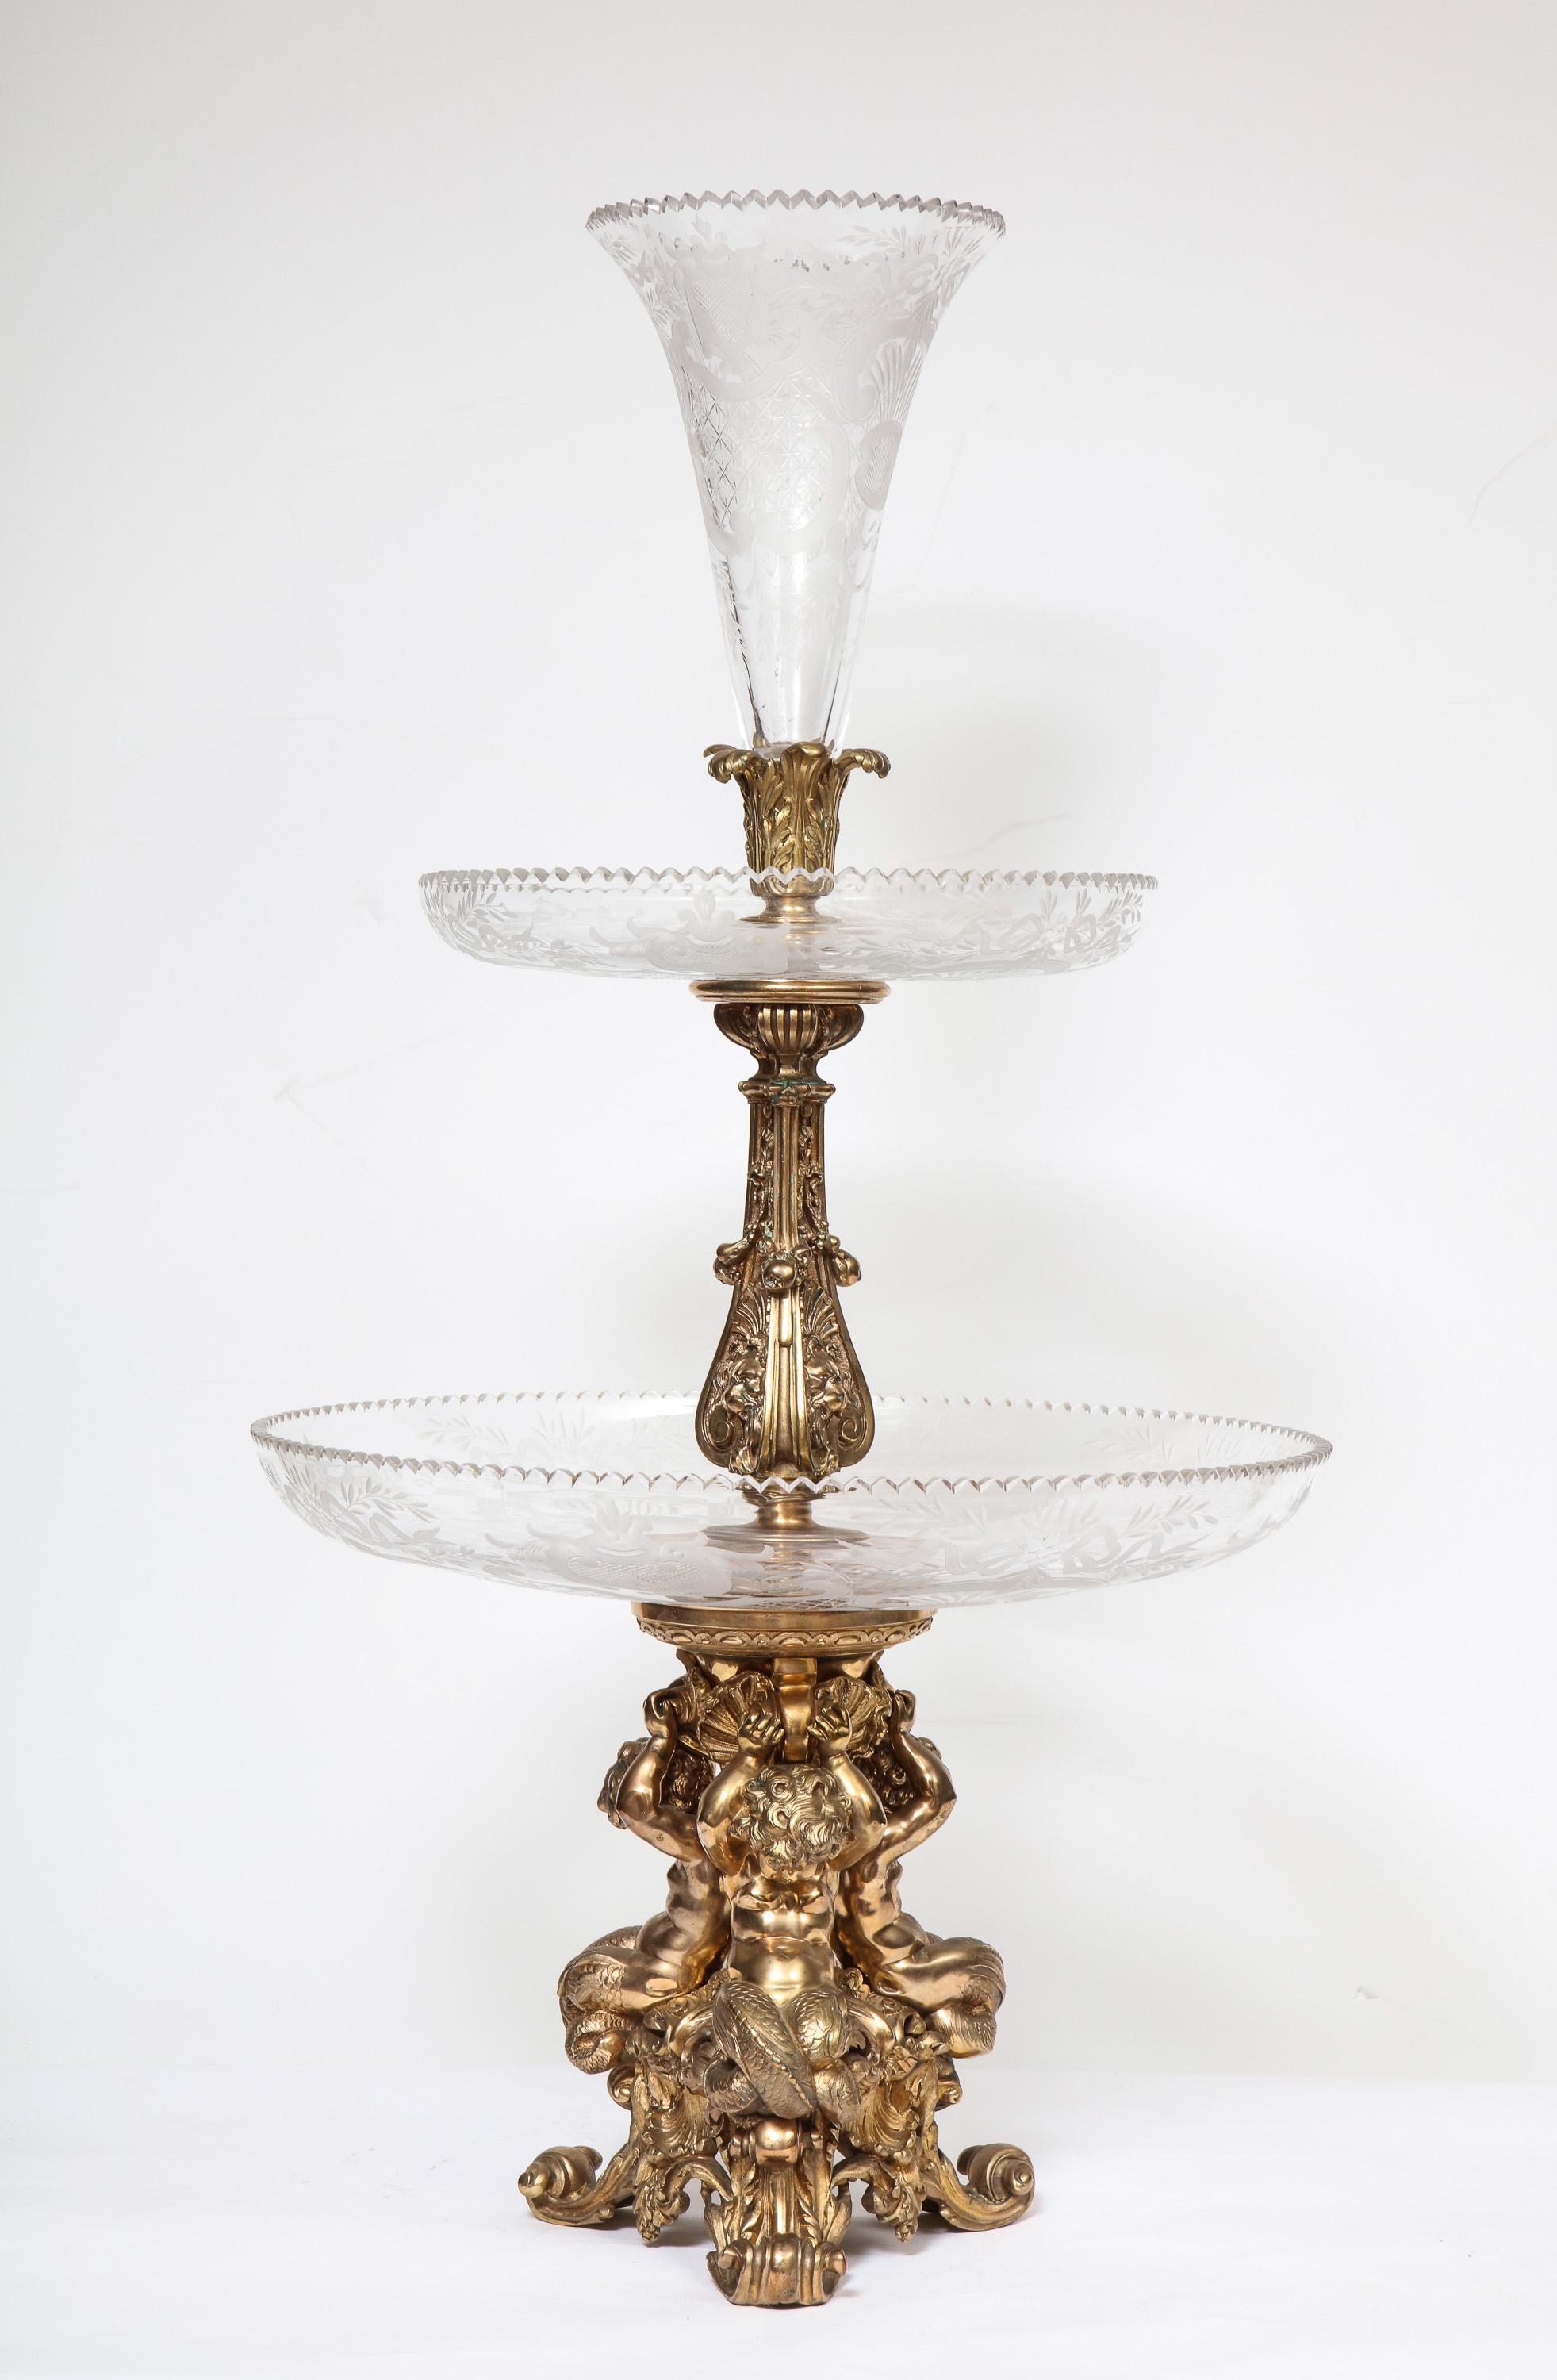 A large French silvered bronze & cut crystal allegorical three-tier centerpiece, attributed to Christofle Paris, circa 1880.

Cast with three seated silvered bronze putti holding the large and impressive three tier etched glass plates and fluted